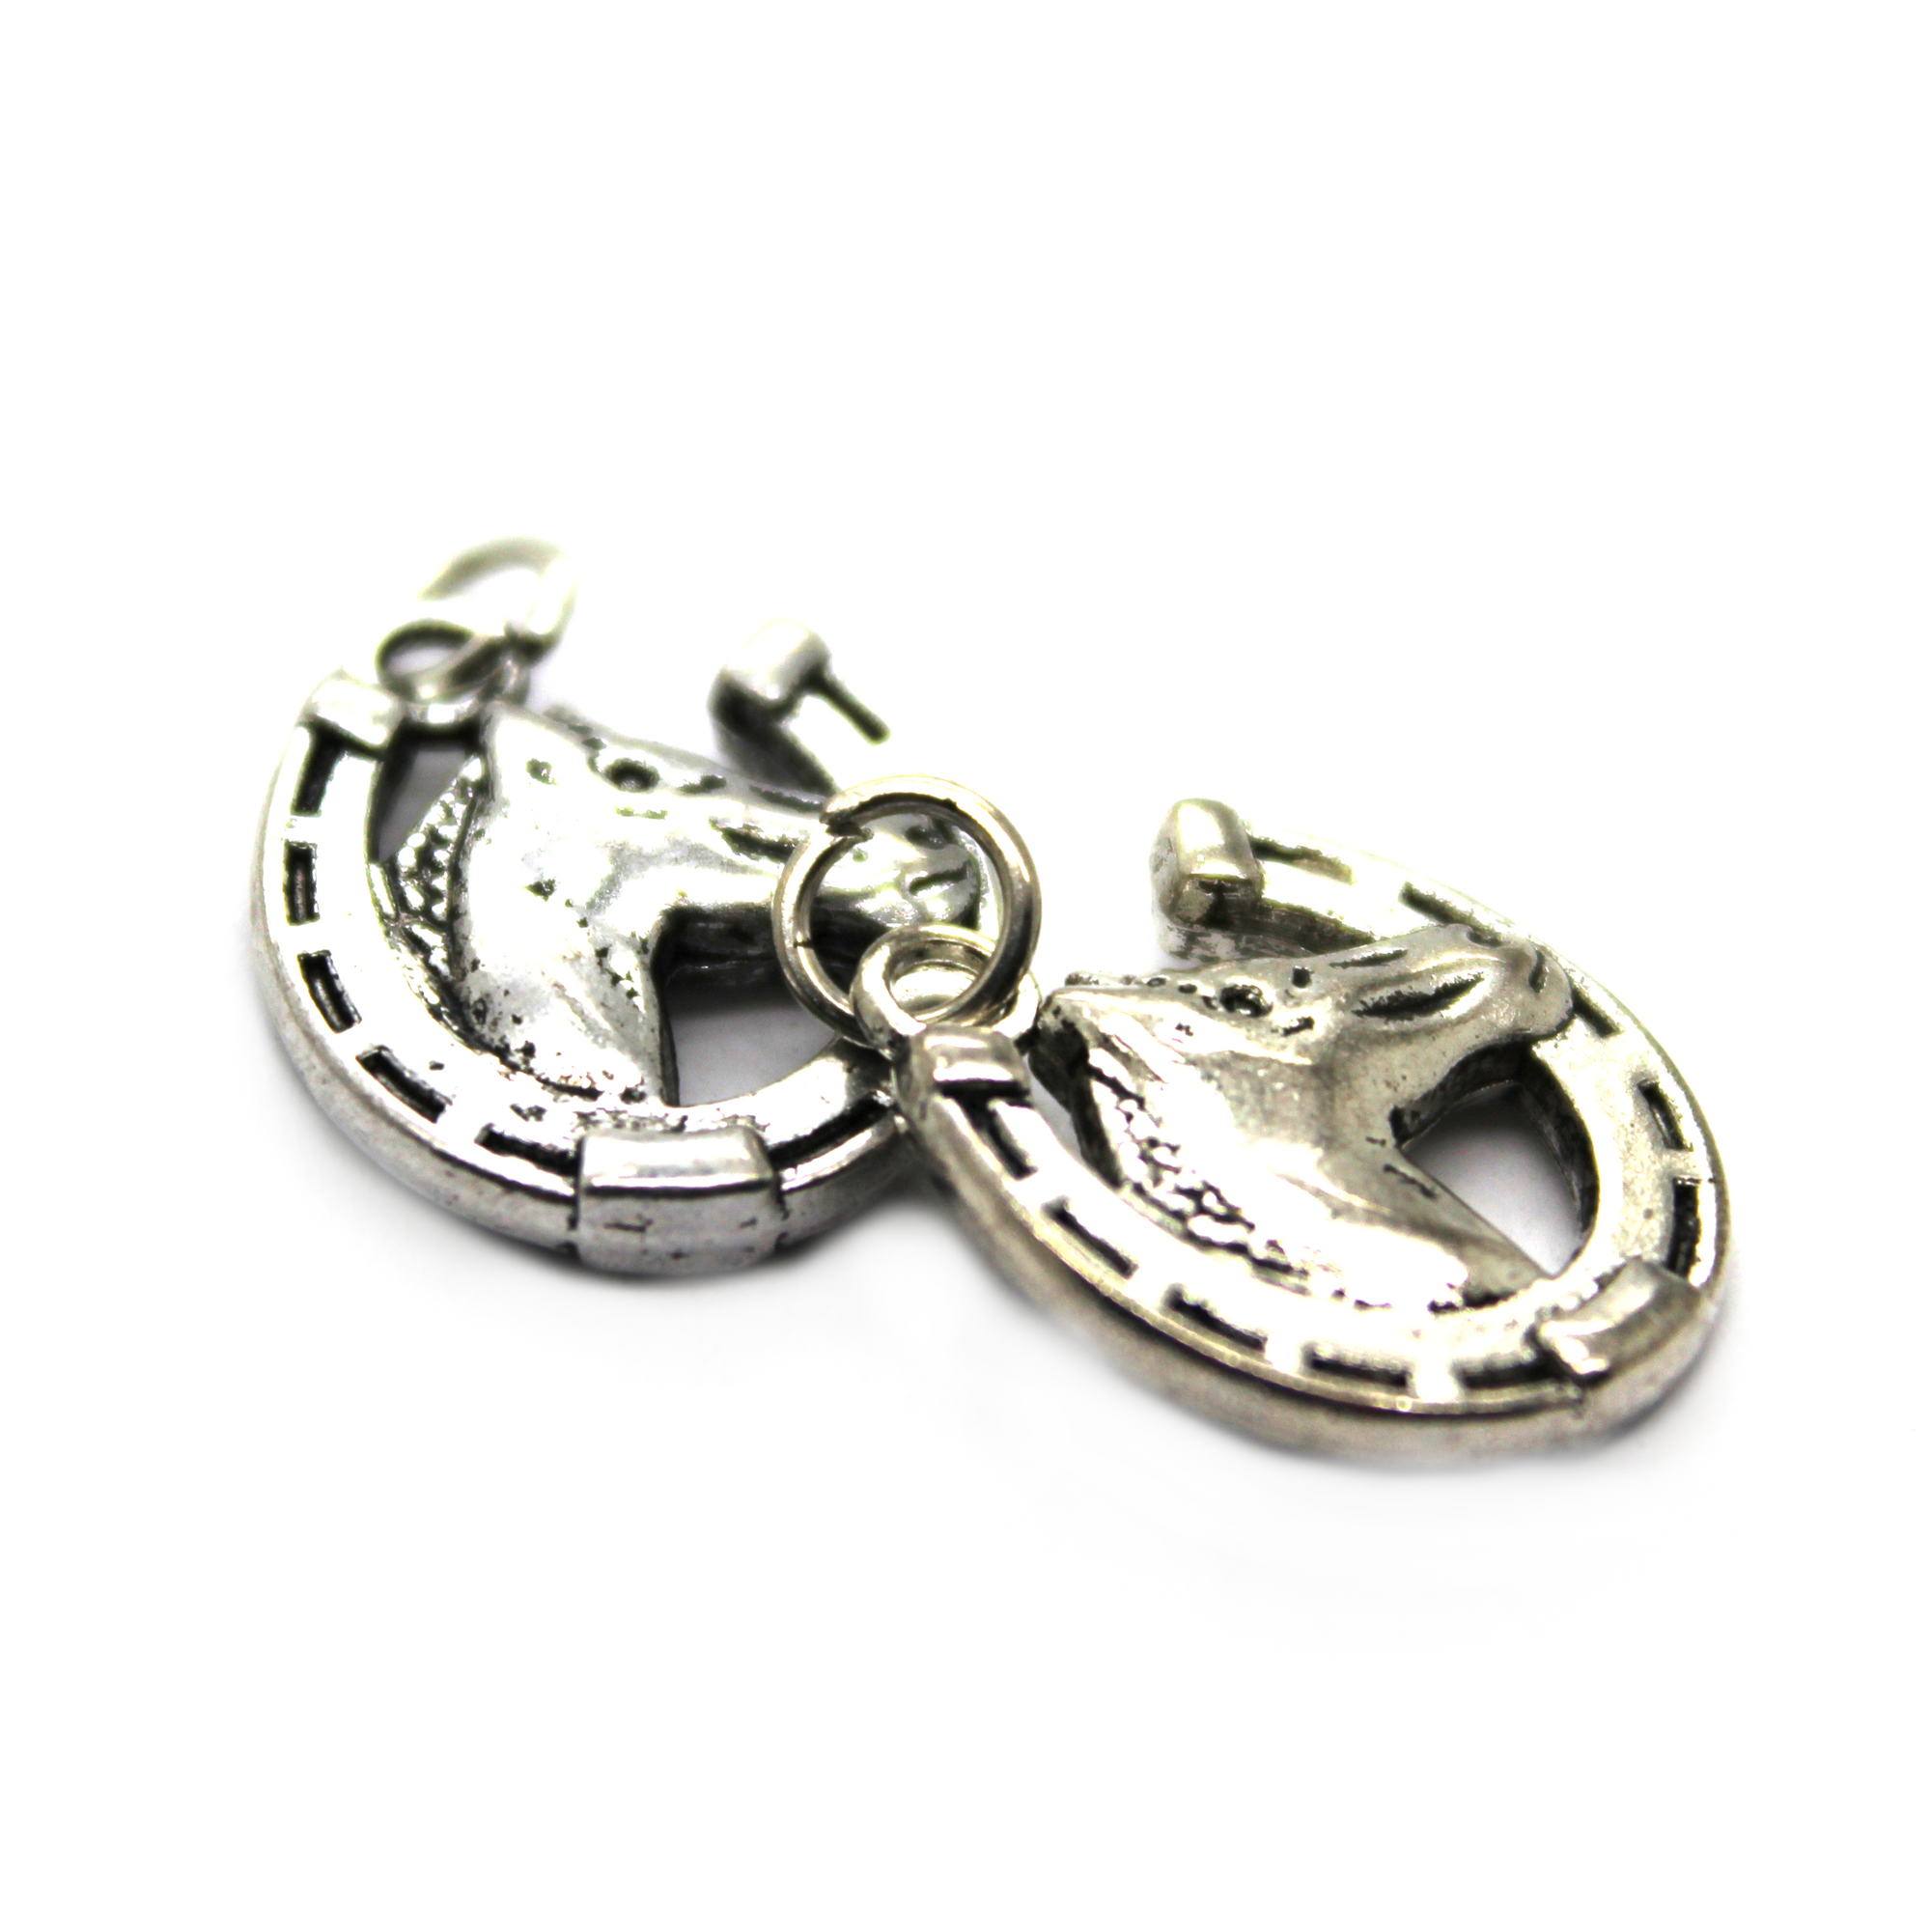 Charms, Horseshoe & Horse, Silver, Alloy, 16mm X 17mm, Sold Per pkg of 3